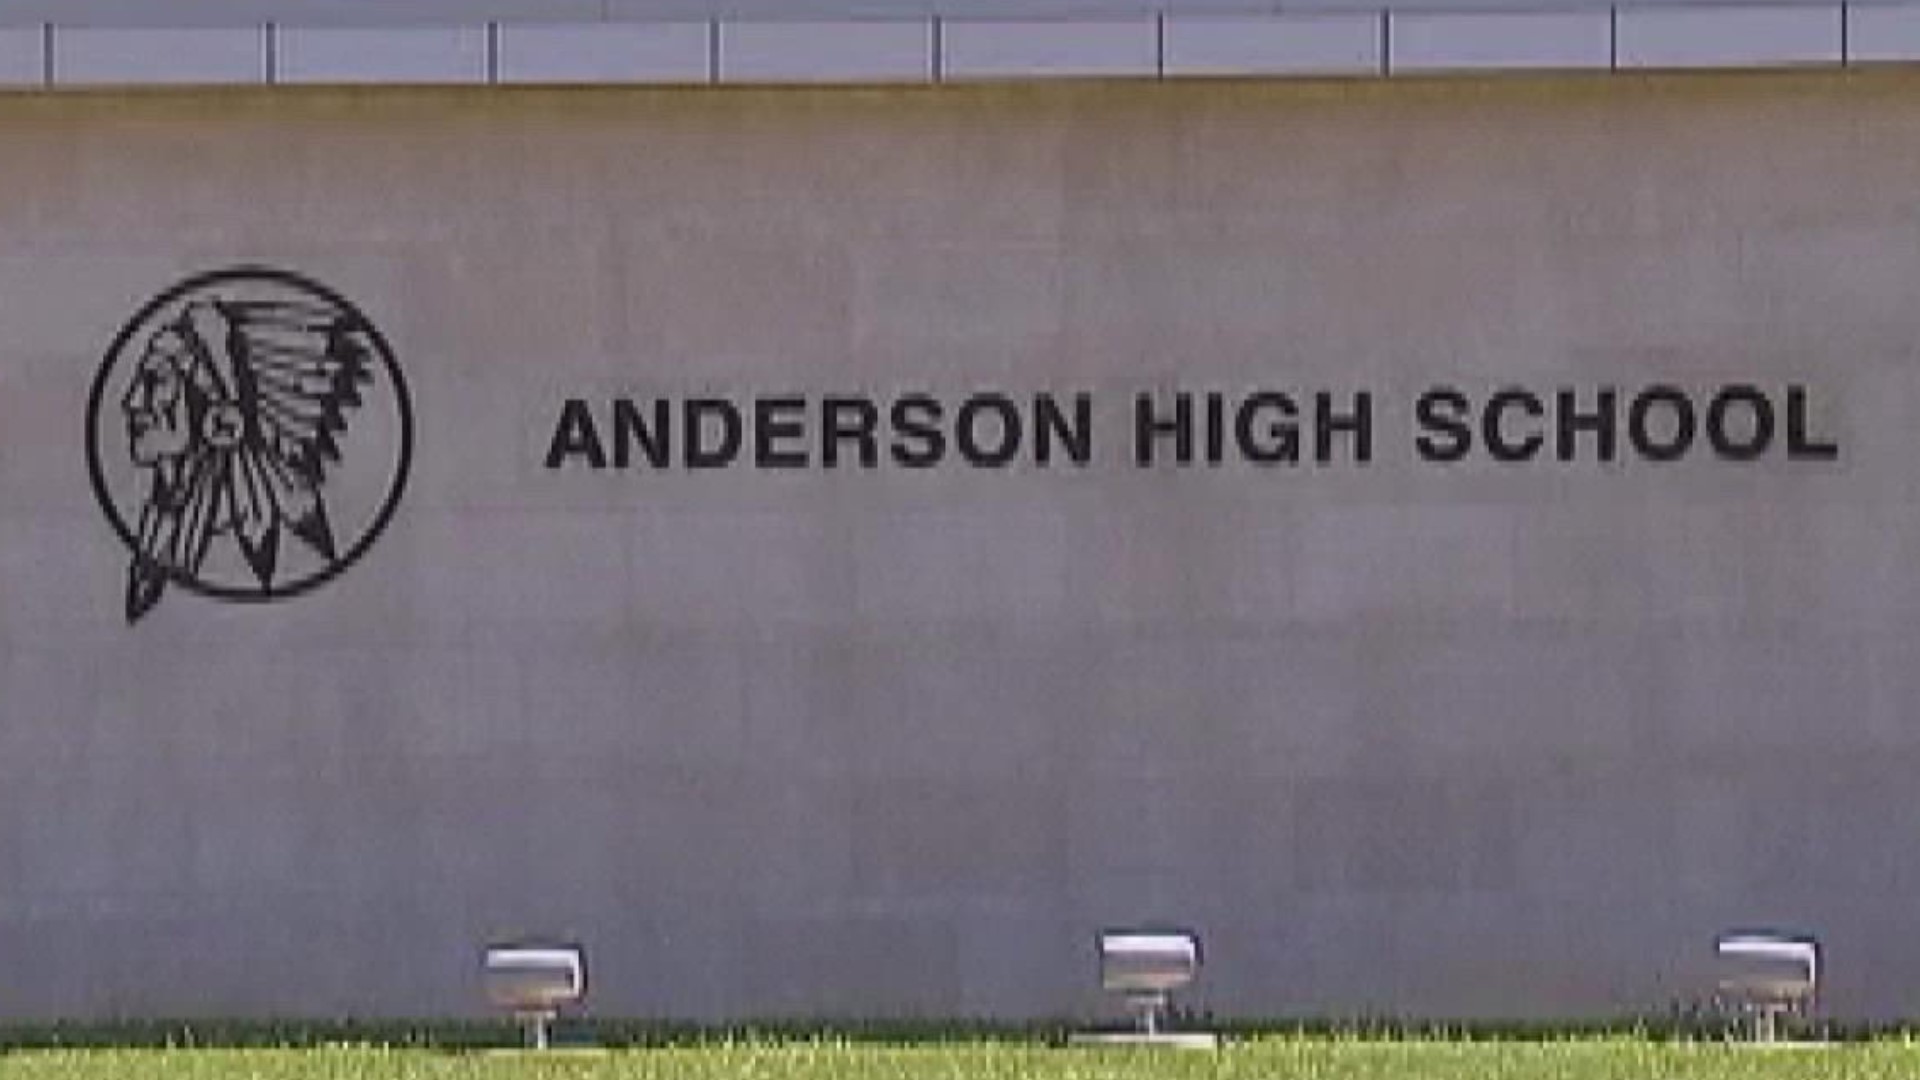 The school said its Indian mascot was a tribute to Chief William Anderson, but the tribe said the chief, if here today, would not dress like the school's mascot